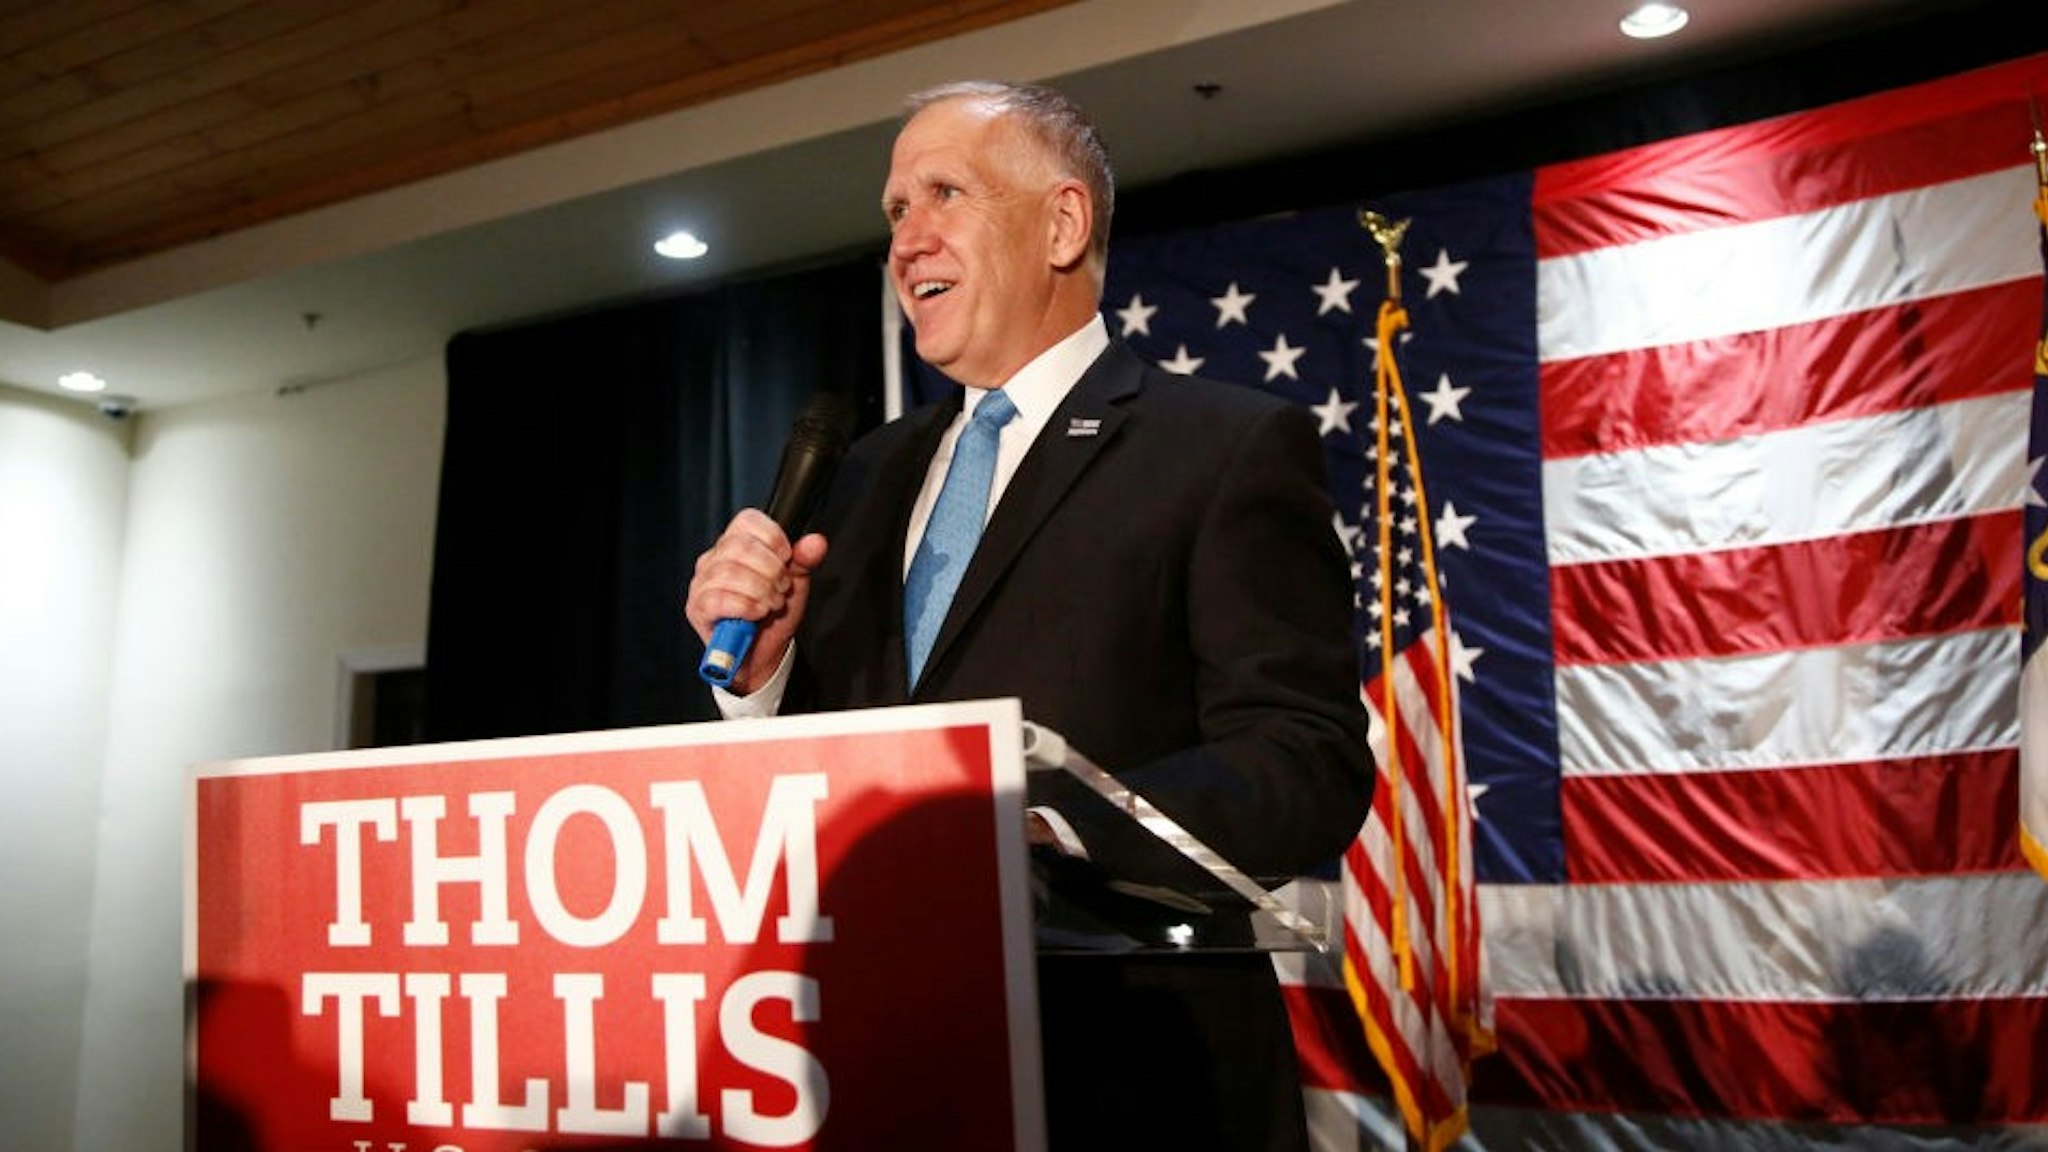 MOORESVILLE, NC -NOVEMBER 3: U.S. Sen. Thom Tillis (R-NC) addresses supporters as he celebrates winning his bid for reelection against Democratic challenger Cal Cunningham during an Election Night watch party on November 3, 2020 in Mooresville, North Carolina. After a record-breaking early voting turnout, Americans head to the polls on the last day to cast their vote for incumbent U.S. President Donald Trump or Democratic nominee Joe Biden in the 2020 presidential election. (Photo by